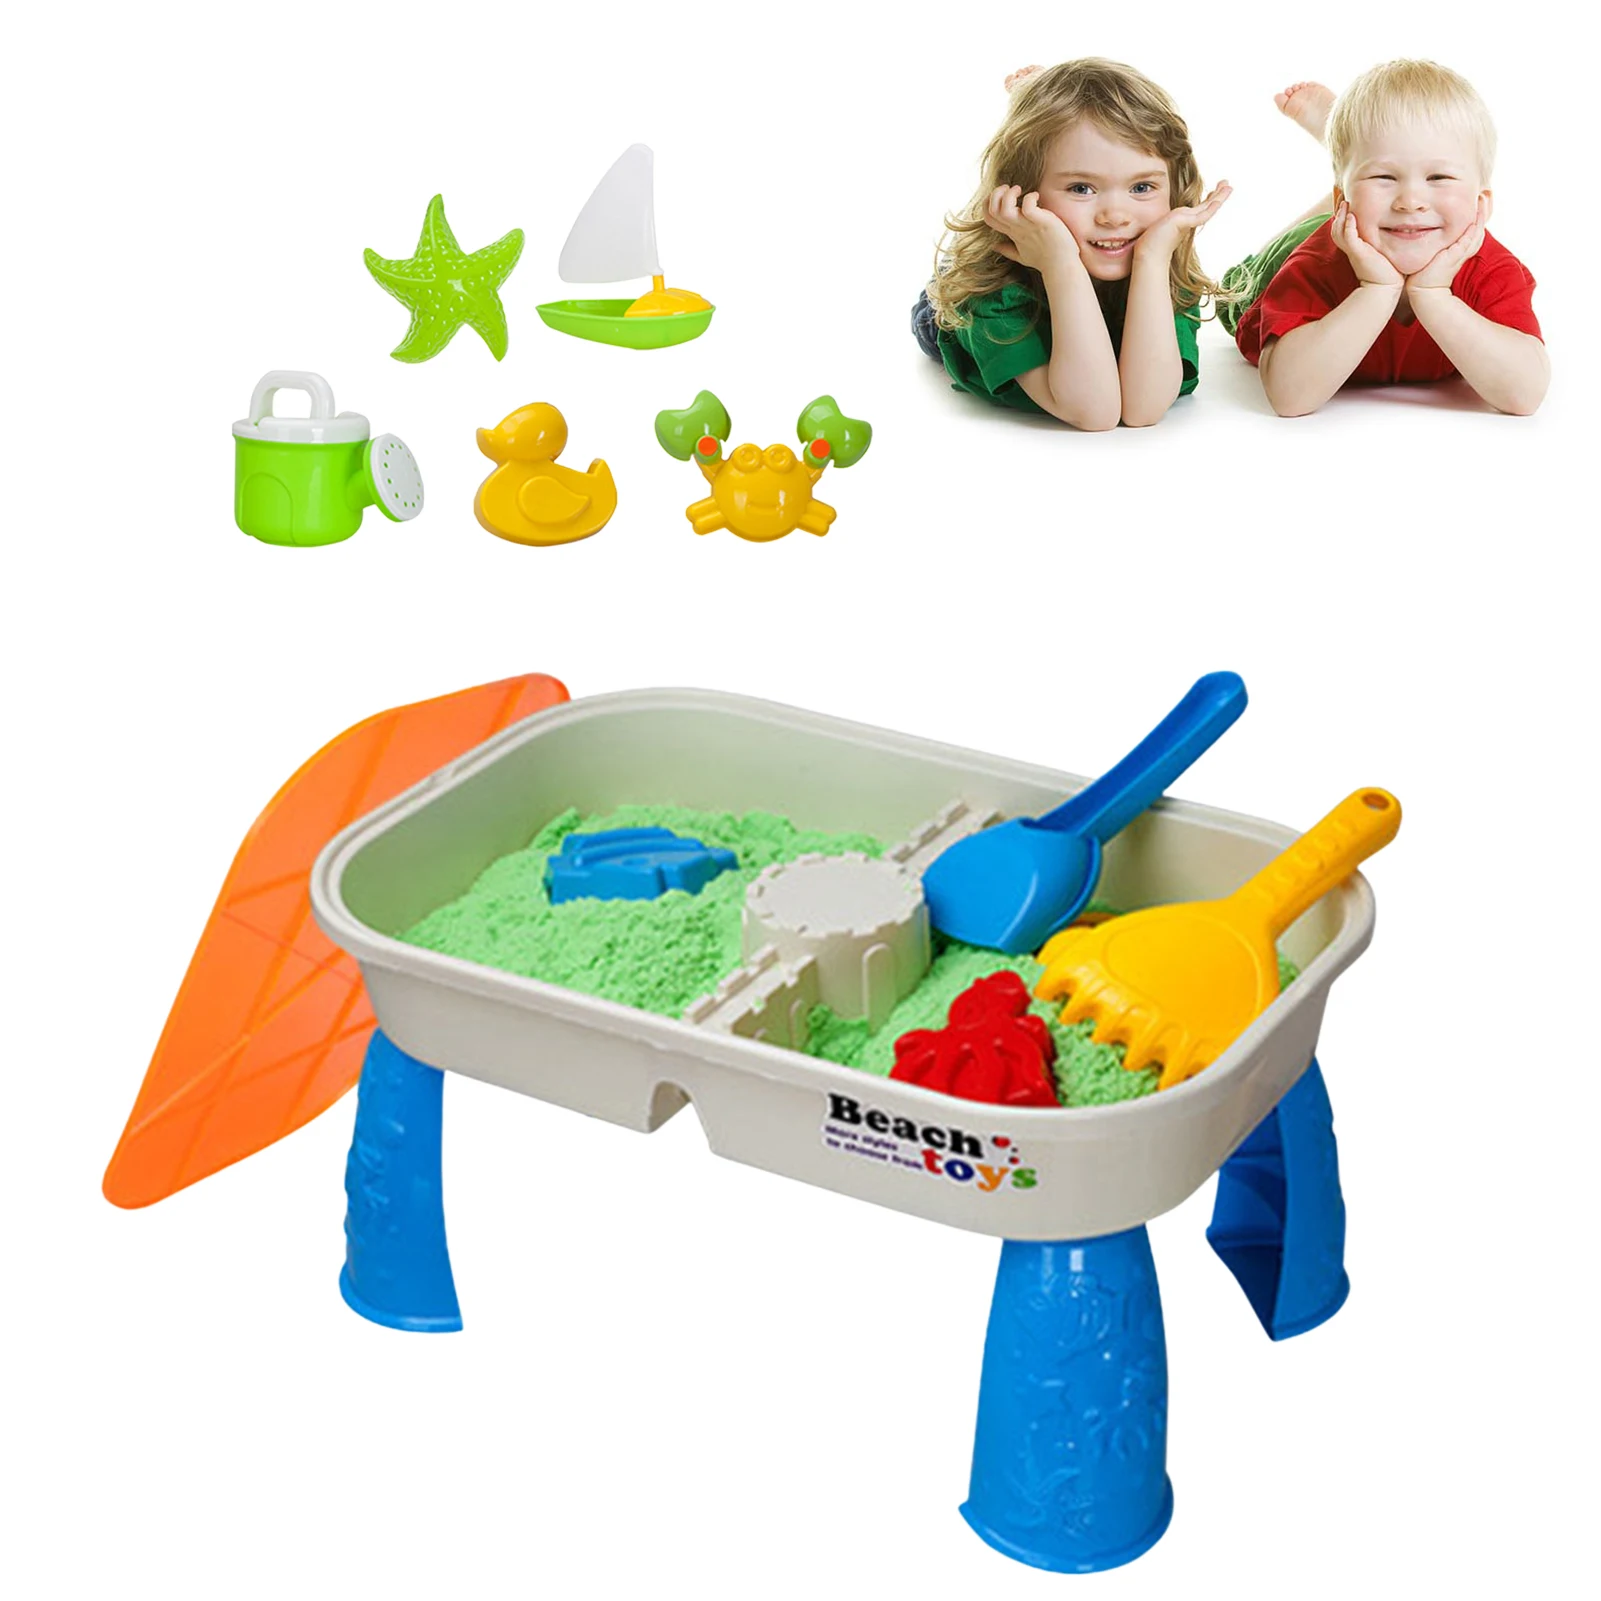 

16Pcs/set Sand Water Table Sandbox Garden Beach Toys With Beach Sand Water Toy Toddlers Sensory Play Table Summer Outdoor Toys